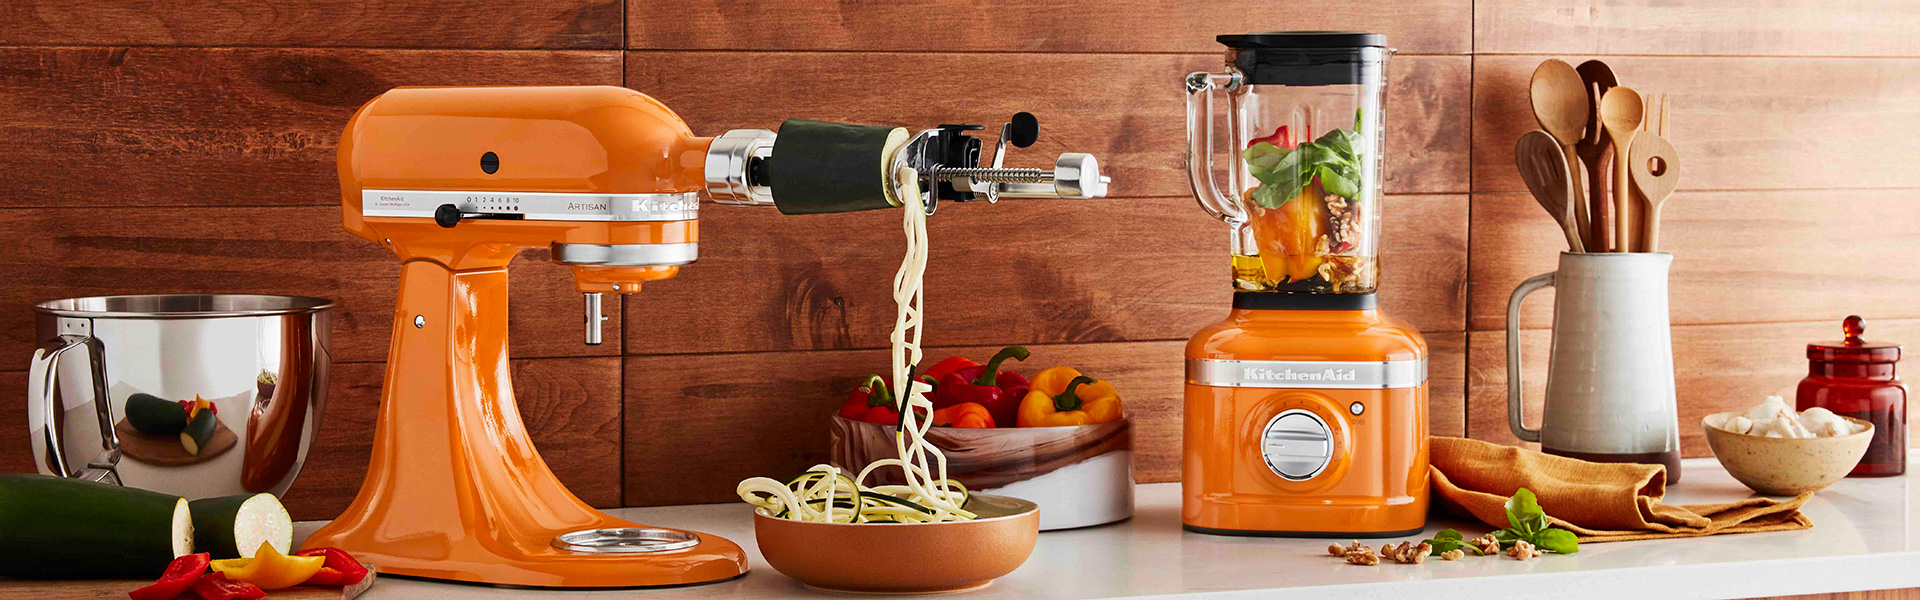 8 clever kitchen gadgets you can buy on  - Goodhomes Magazine :  Goodhomes Magazine